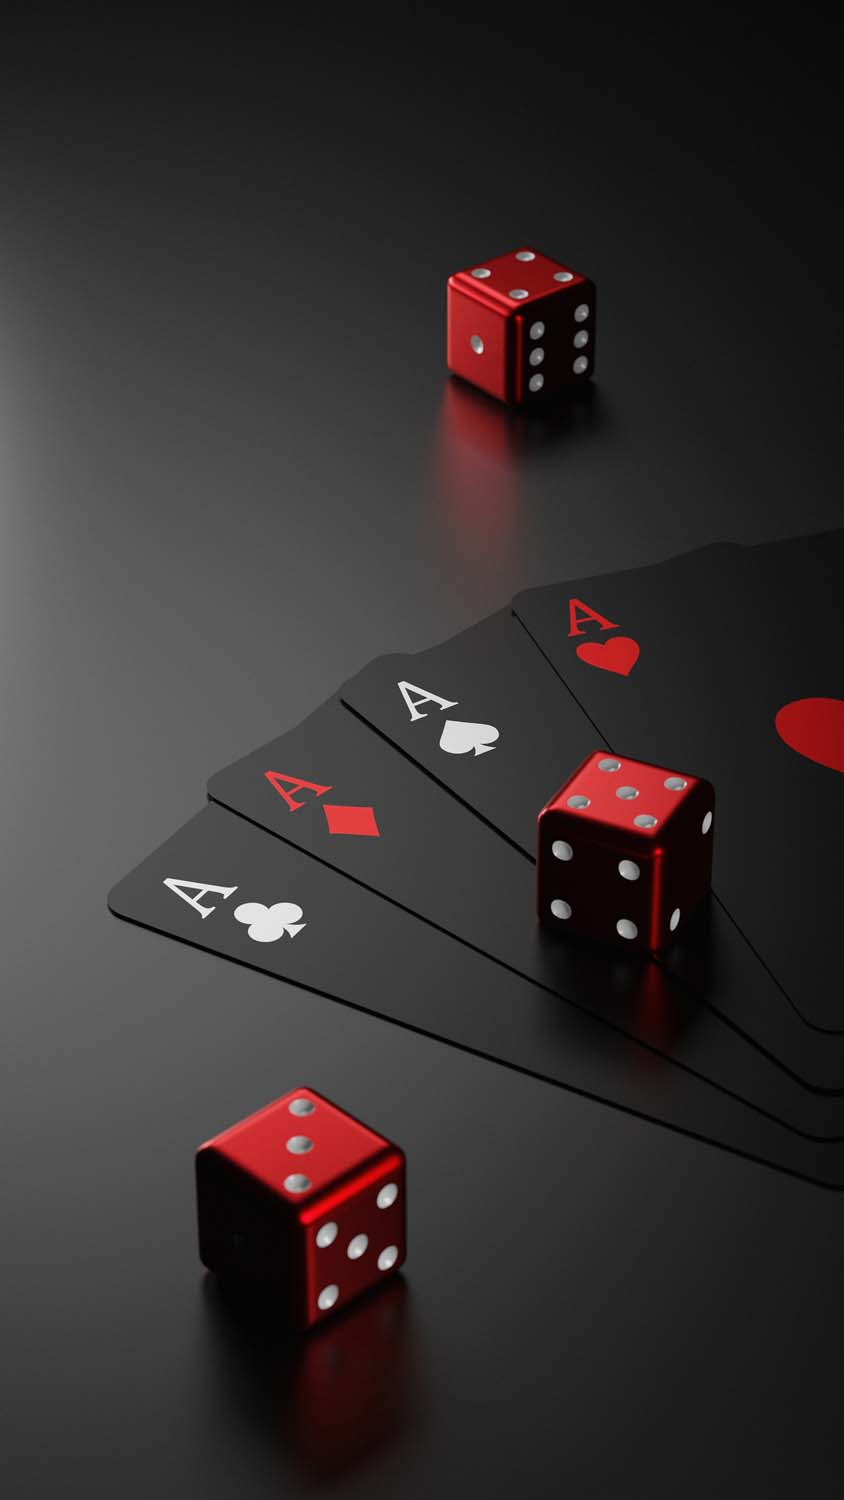 Poker Cards And Dices IPhone Wallpaper HD  IPhone Wallpapers